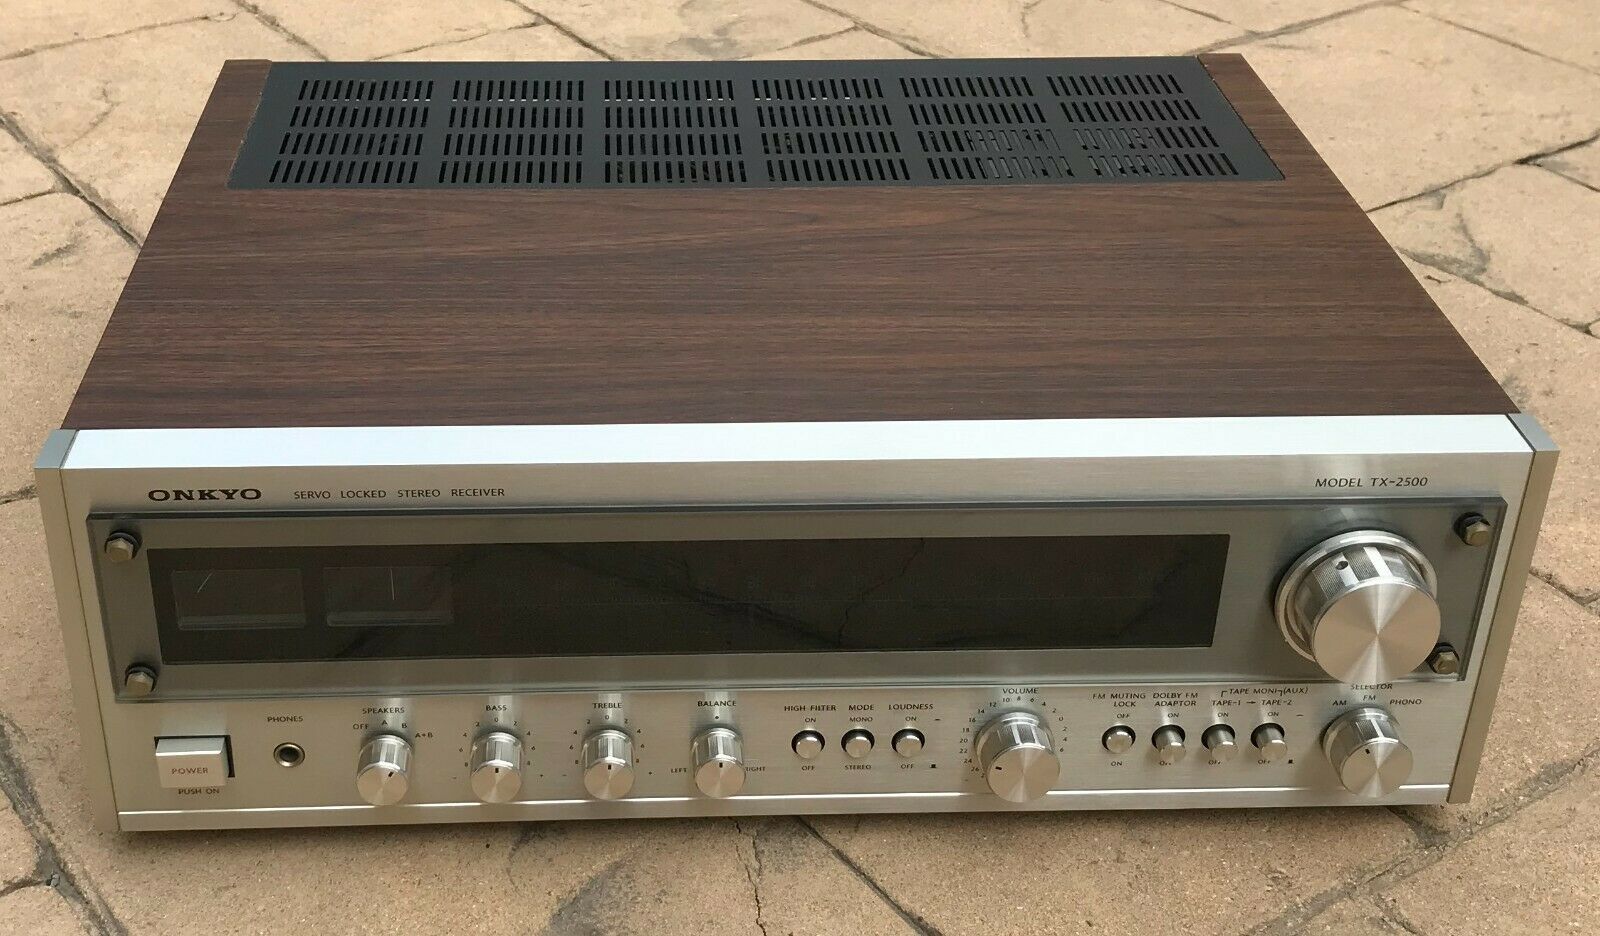 ONKYO Model TX-2500 STEREO RECEIVER w/ Wood Grain Top & Sides - Tested & Works